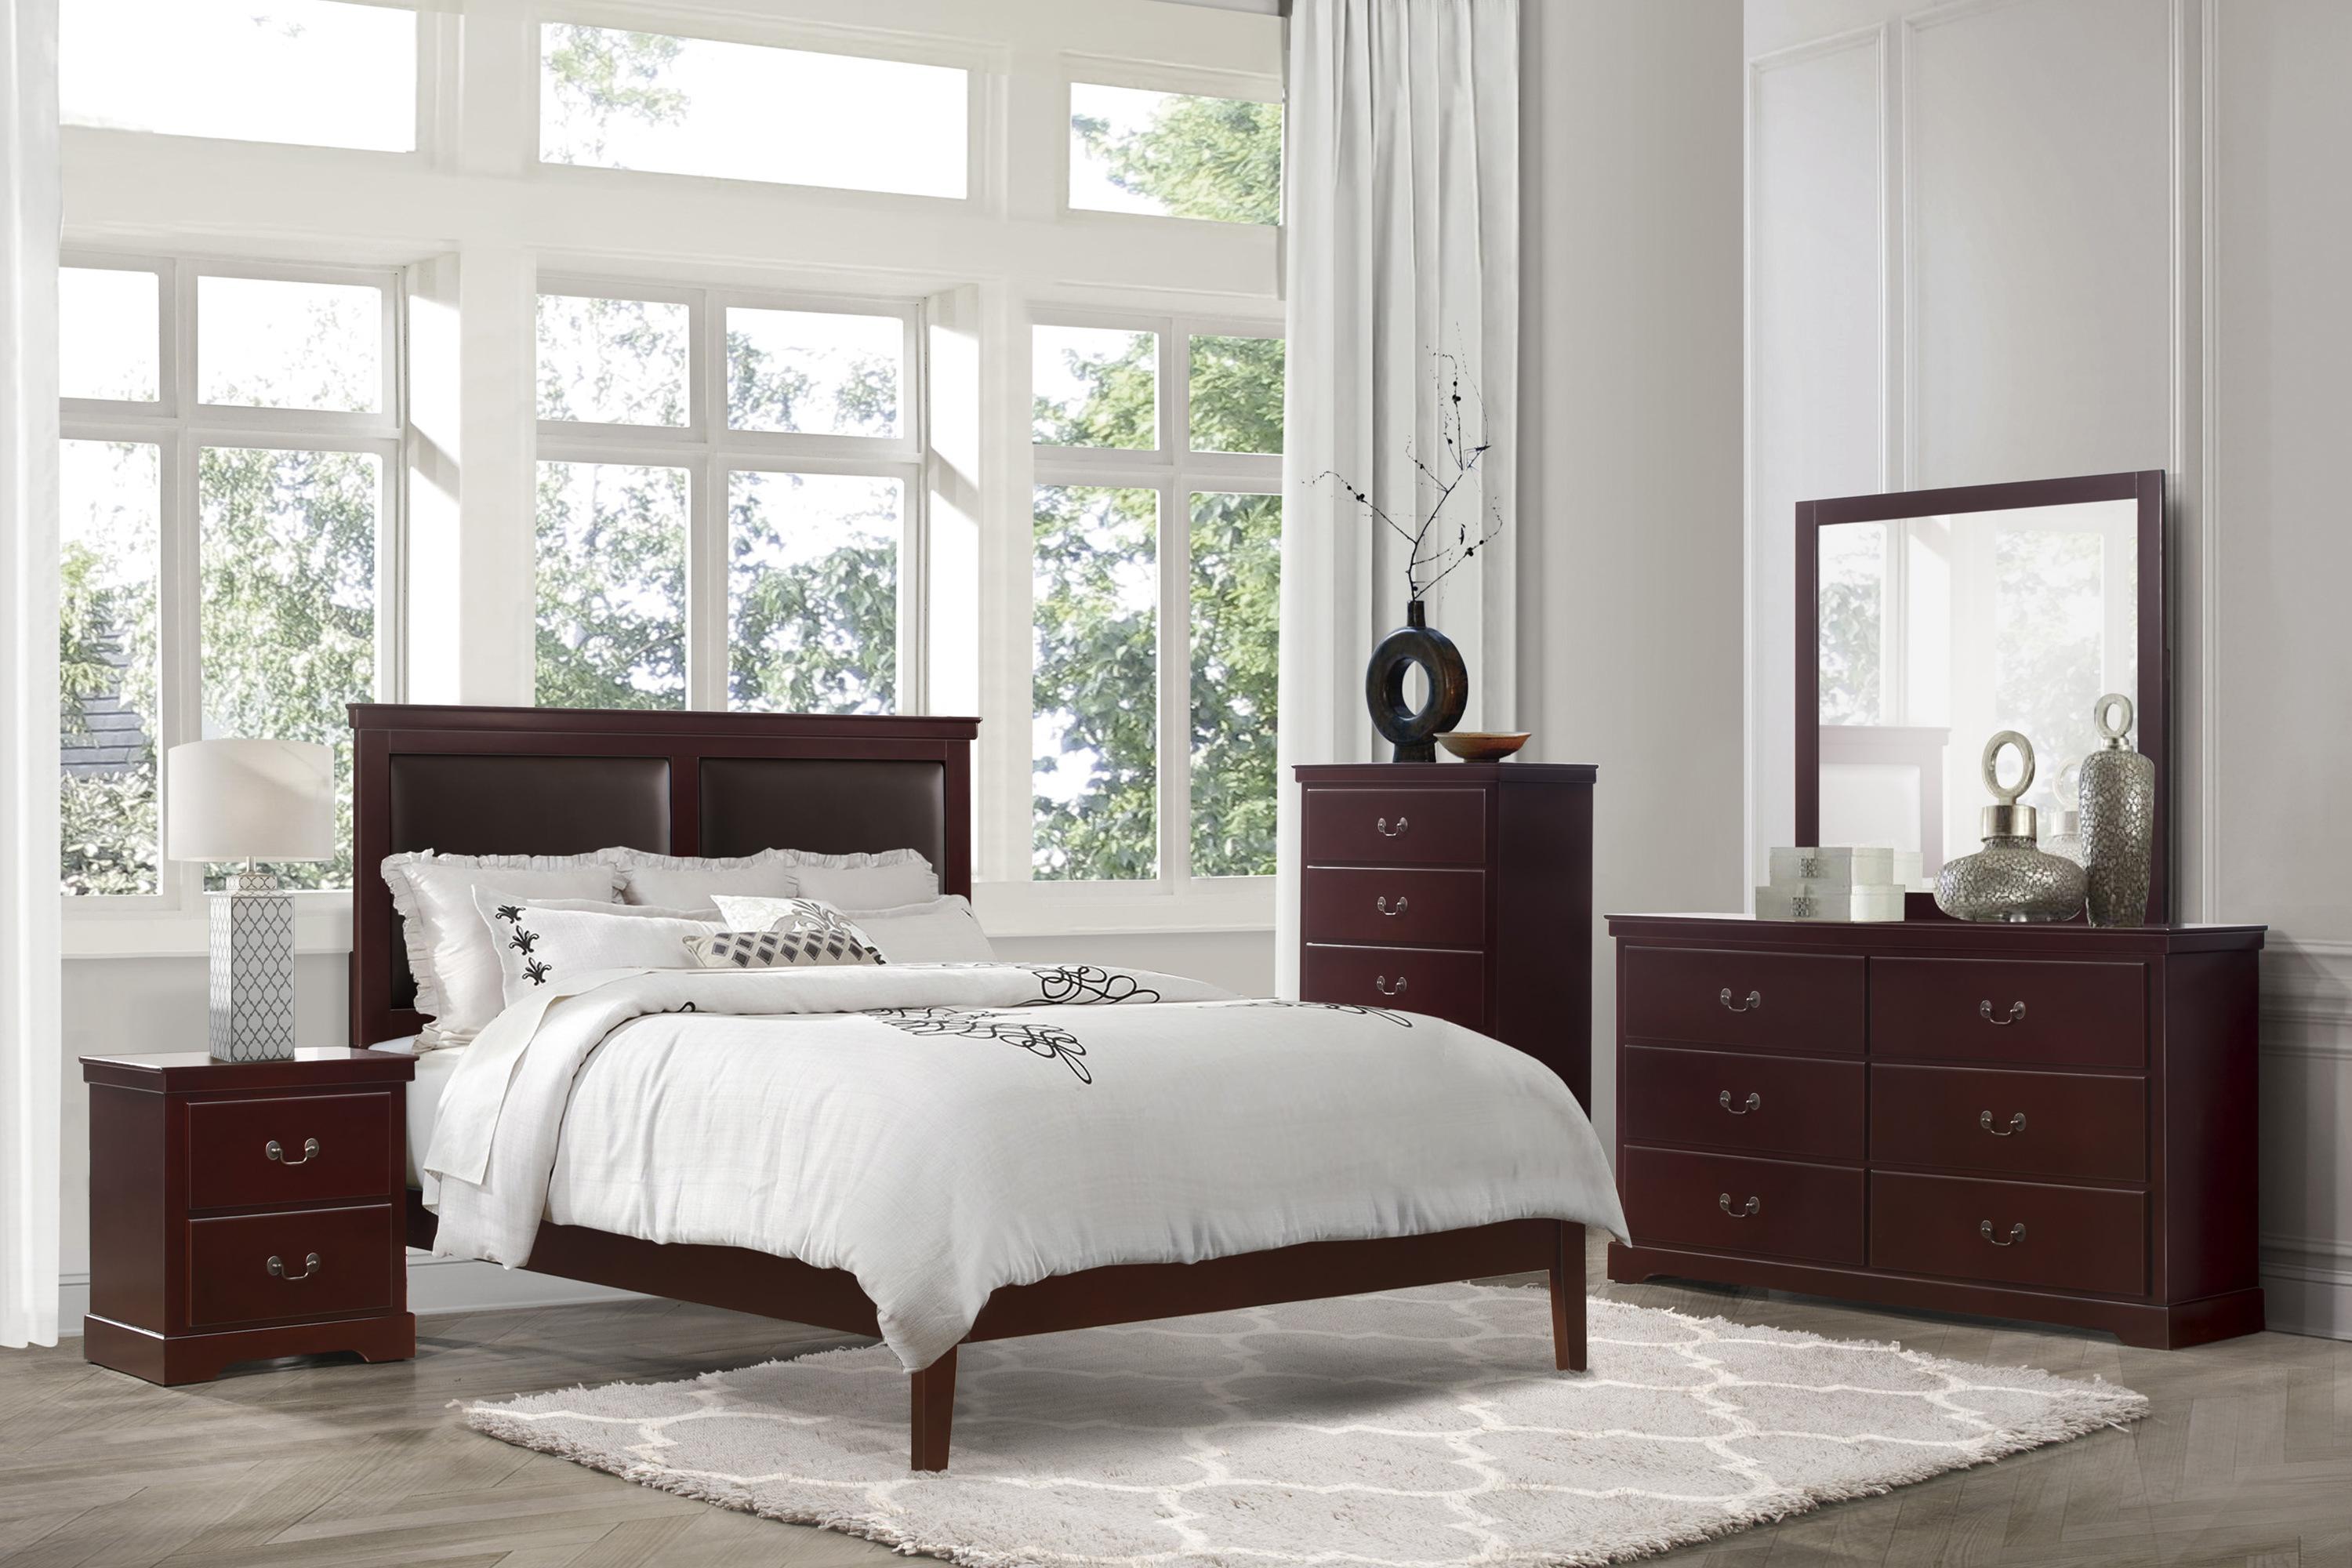 Modern Bedroom Set 1519CHK-1CK-5PC Seabright 1519CHK-1CK-5PC in Cherry Faux Leather